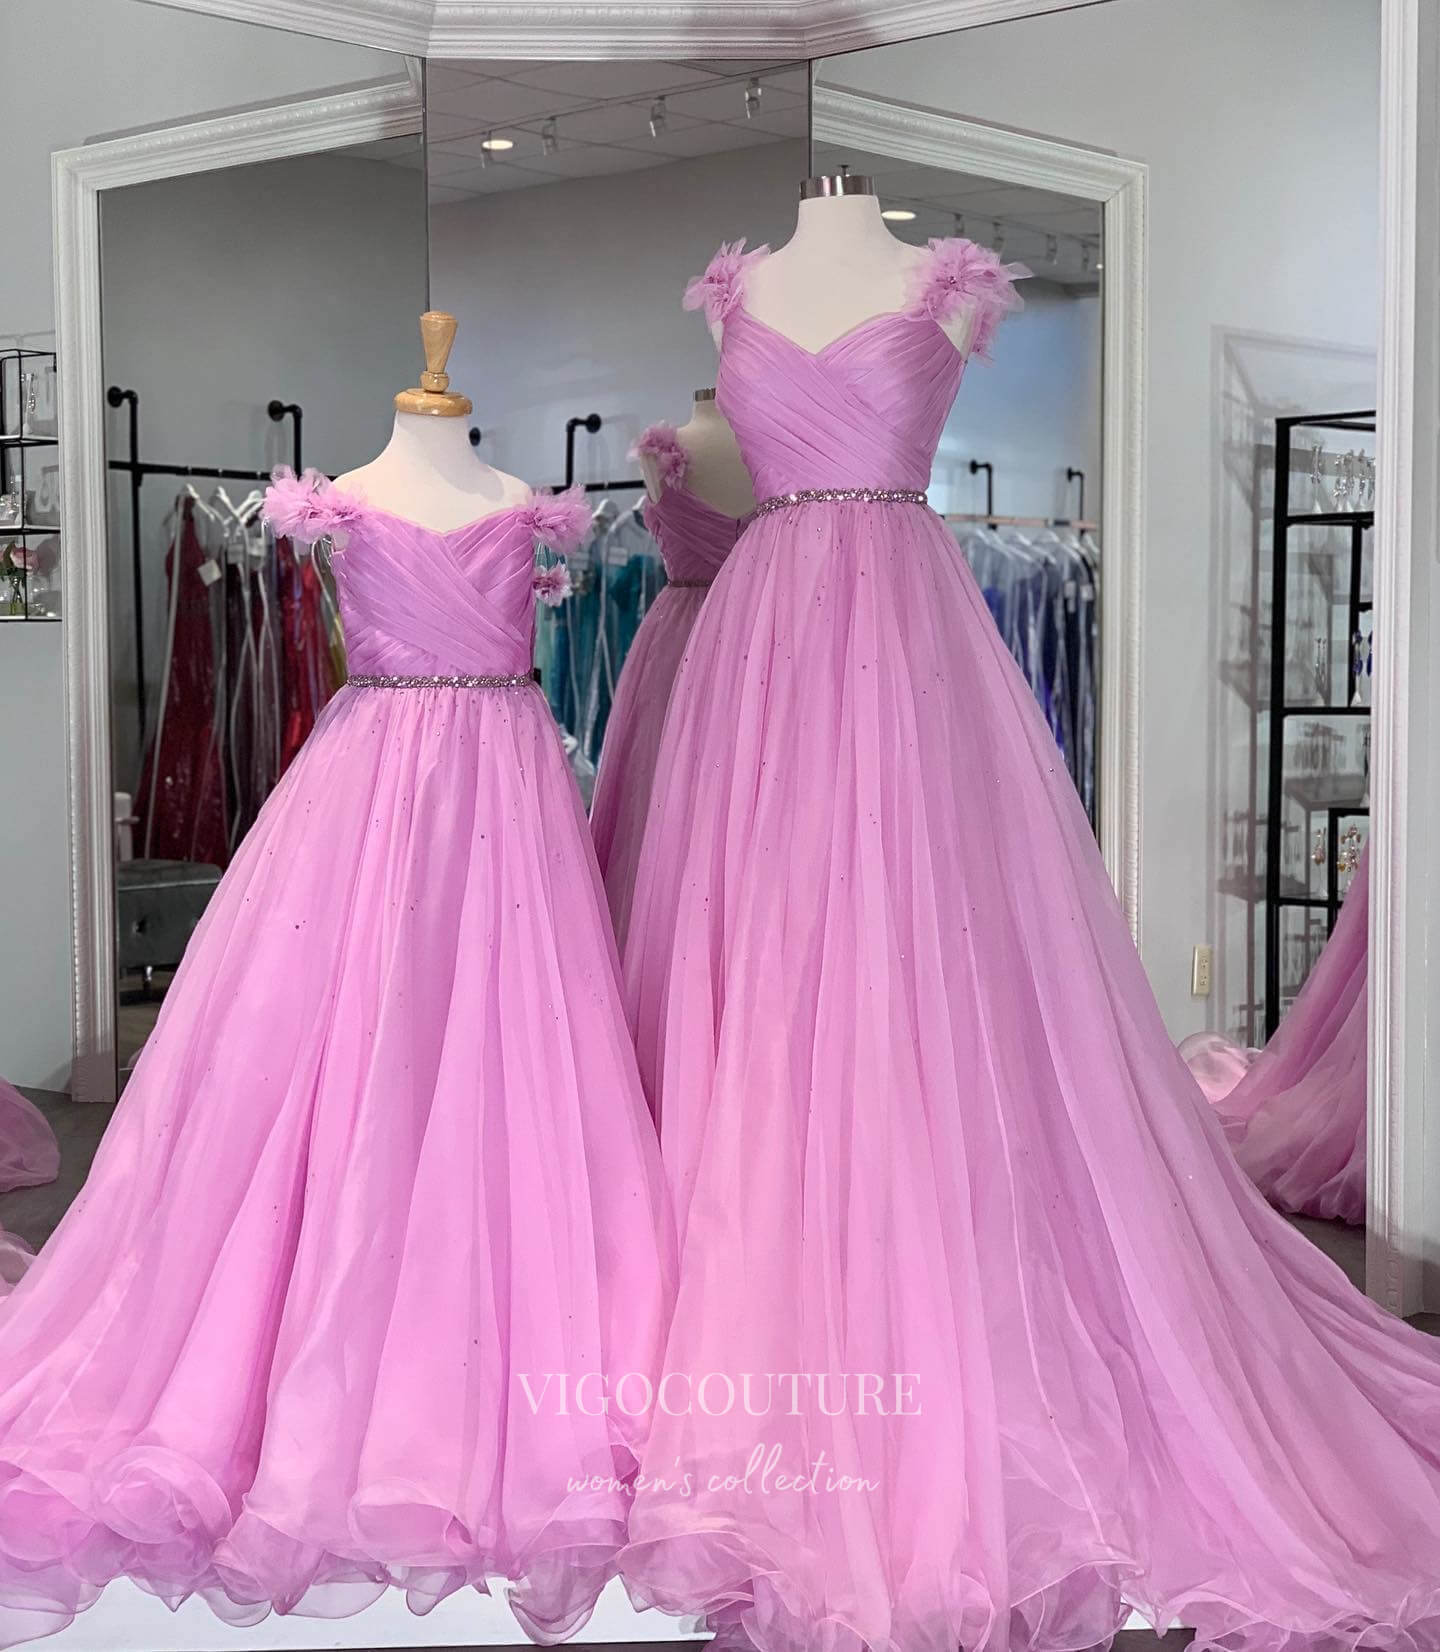 vigocouture-Pink 3D Flower Prom Dresses Pleated Tulle Evening Dress 21783-Prom Dresses-vigocouture-Pink-US2-